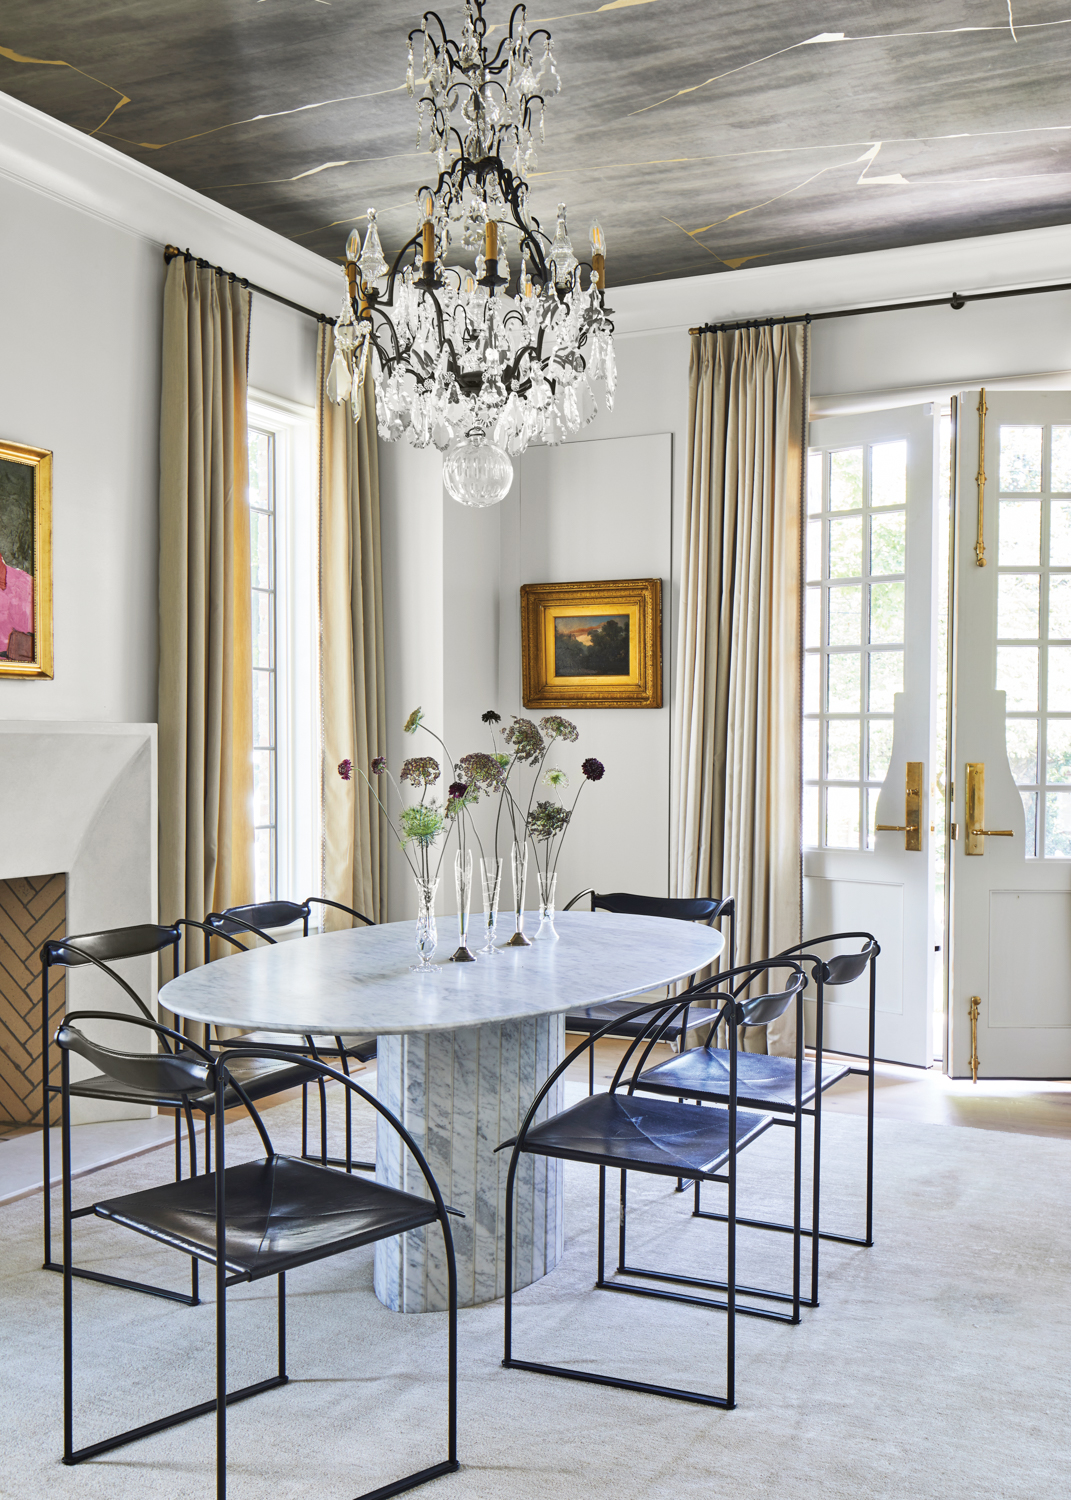 It’s Like A Chic Parisian Hotel Inside This Artful Tennessee Abode